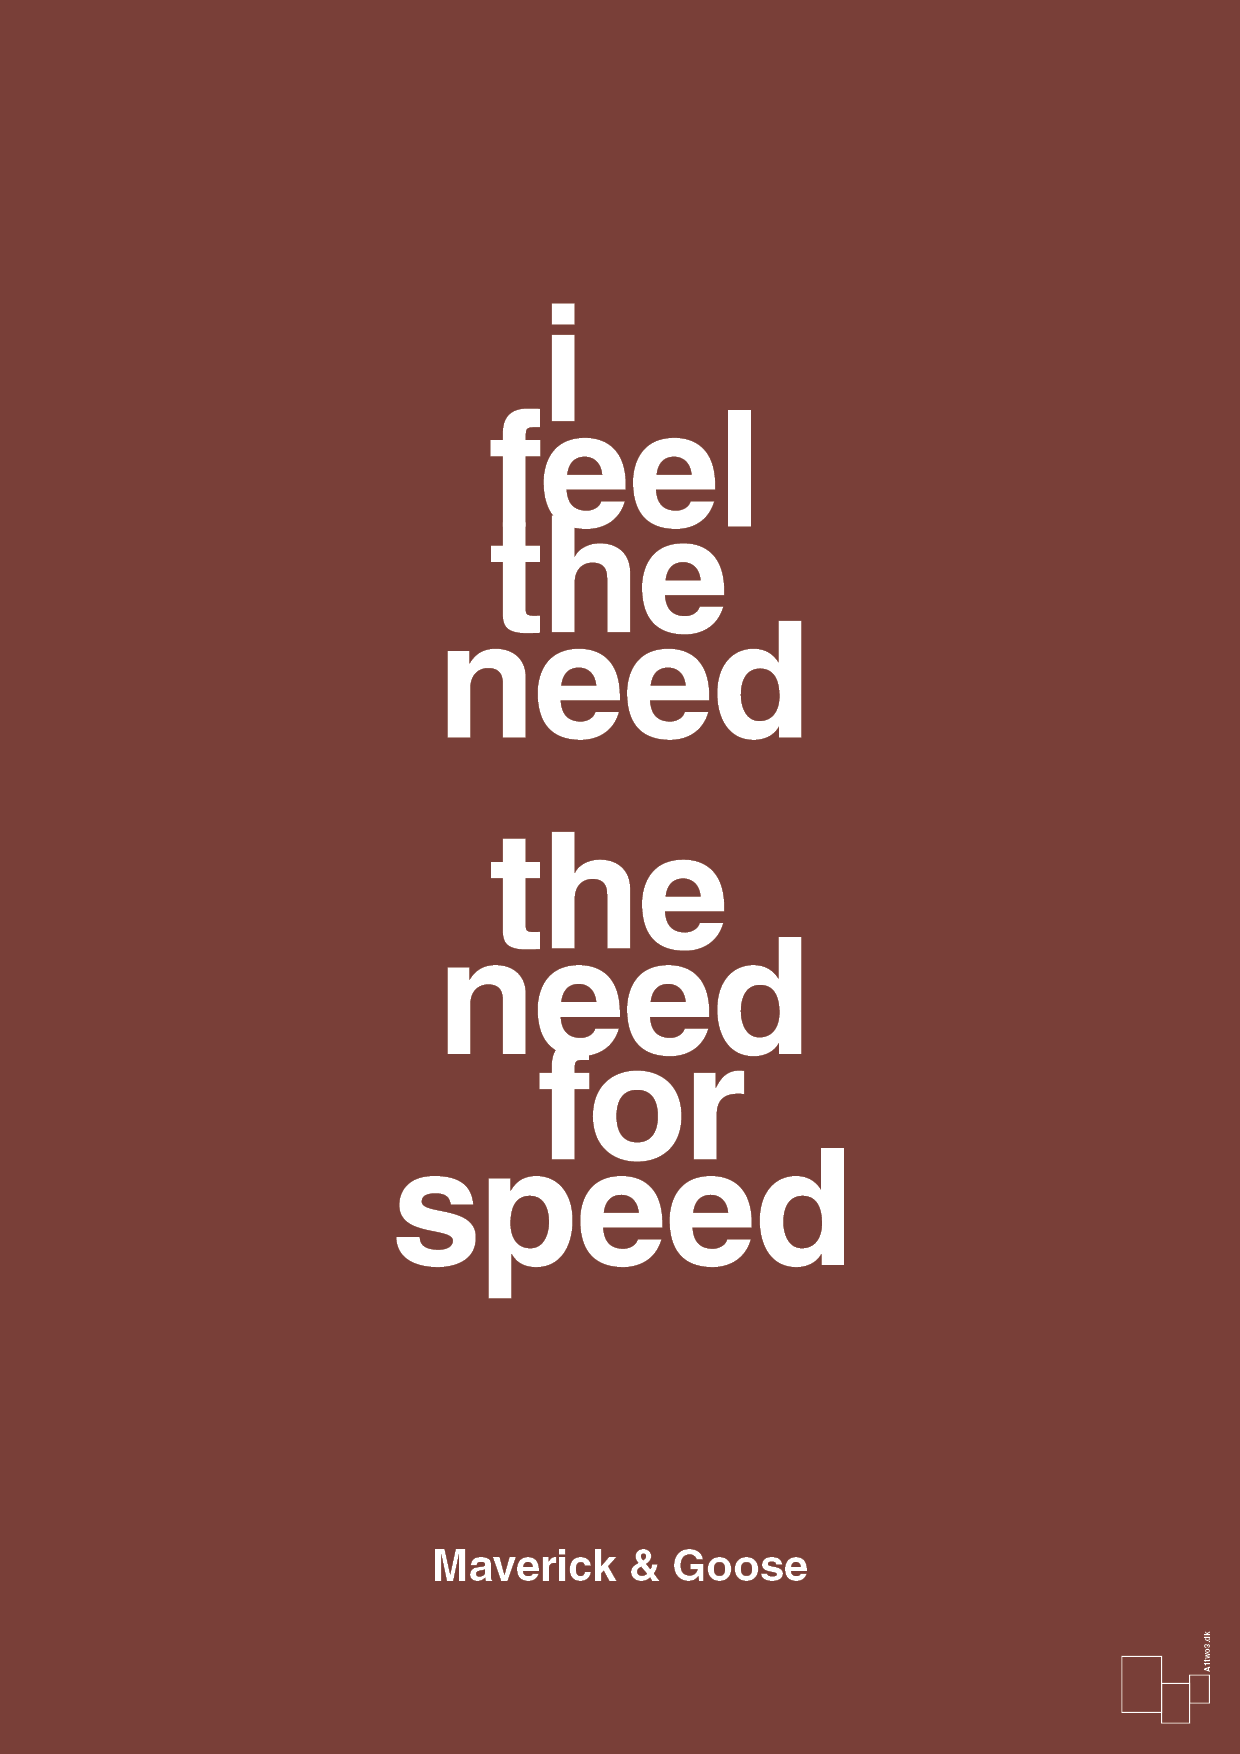 i feel the need the need for speed - Plakat med Citater i Red Pepper